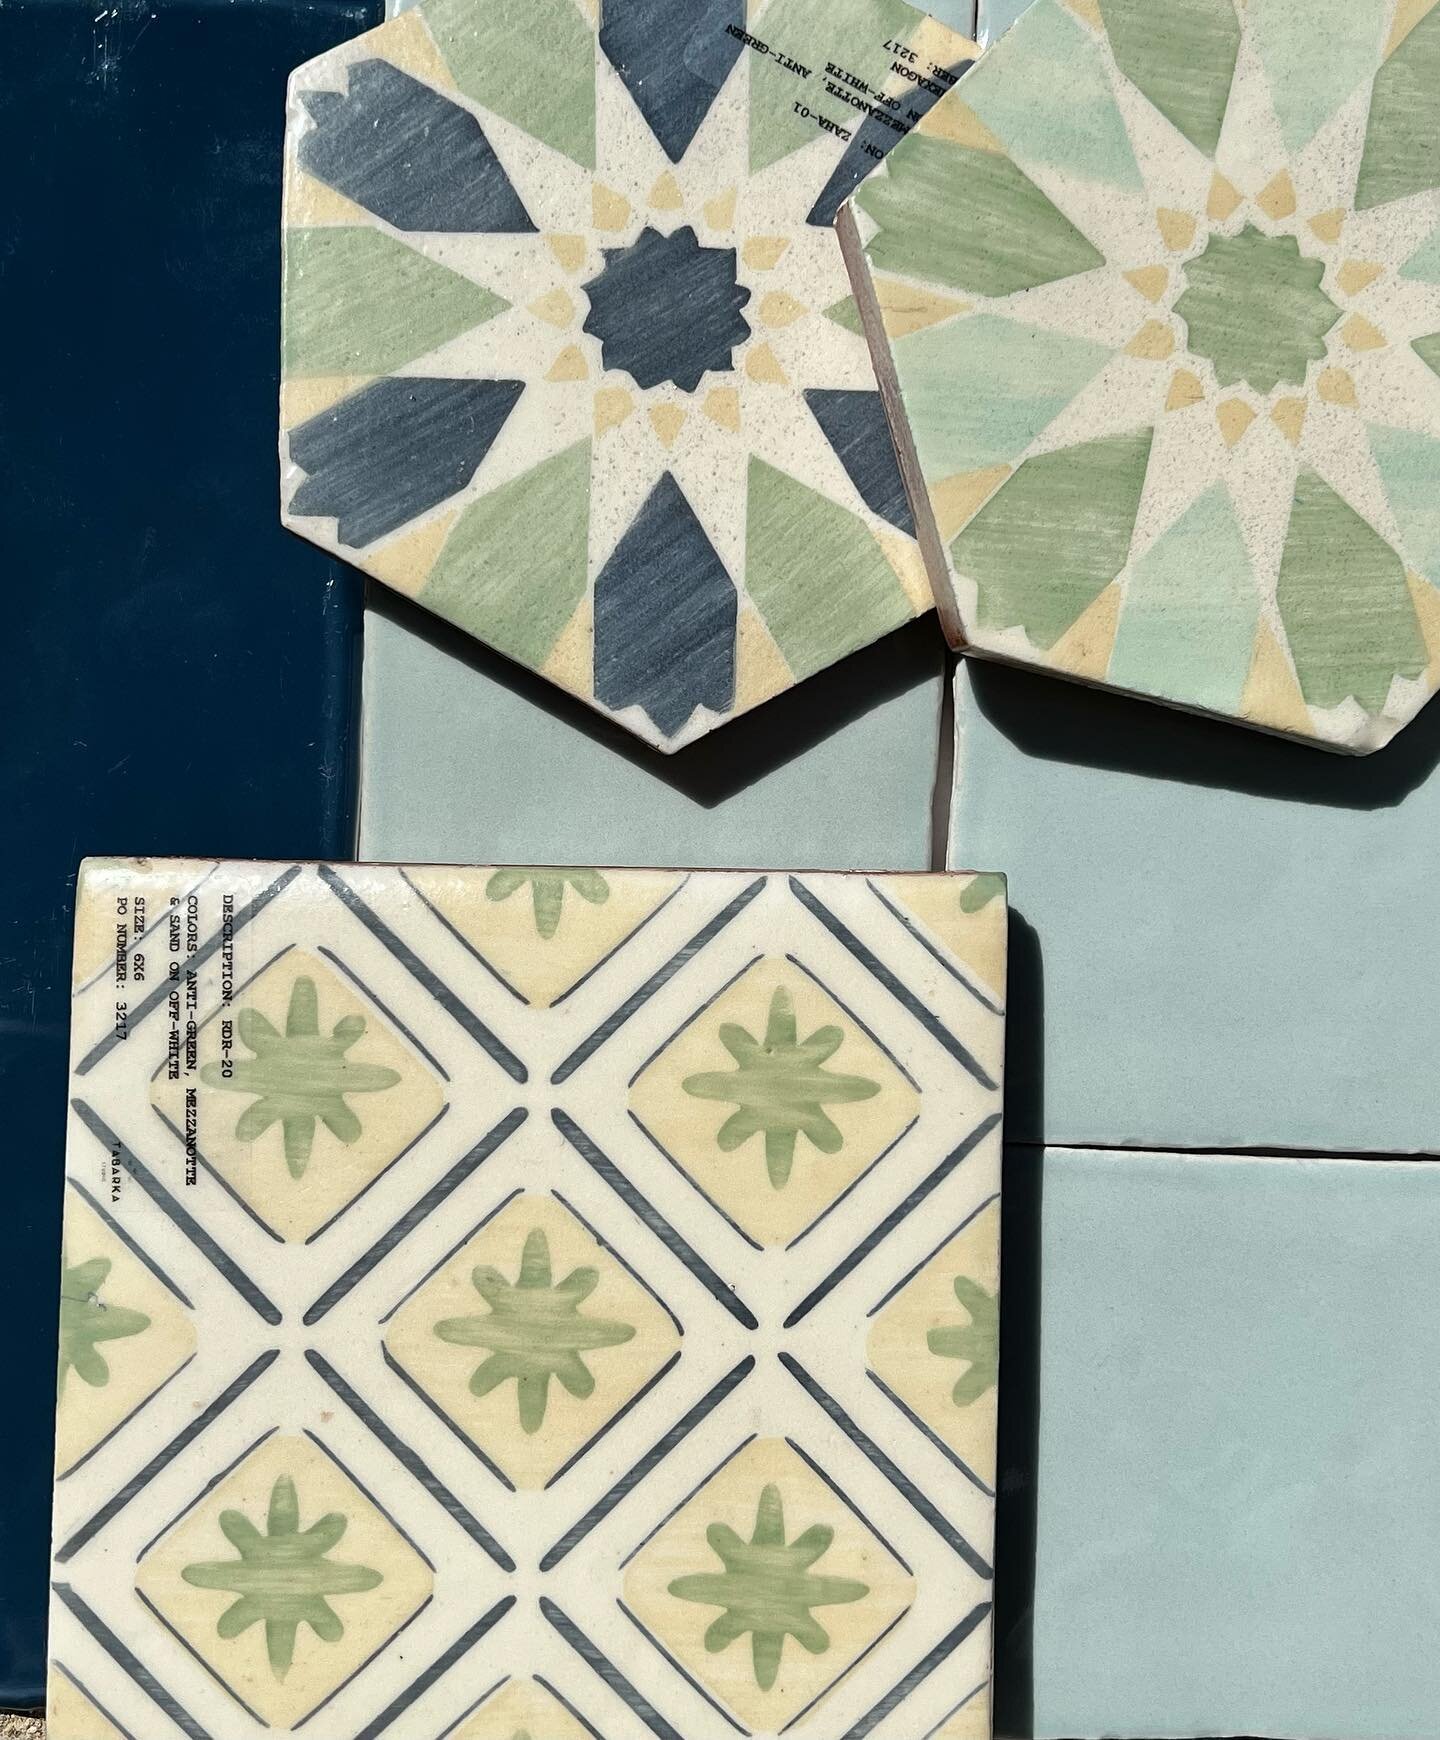 Hanging on to Summer like&hellip;. How beautiful are these custom terra-cotta options for a Lake house kitchen? 

.
.
.
.

#tileobsessed #designobsessed
#tileaddiction  #tileart #tile #stone #mosaictile #designideas #design #interiorinspiration #inte